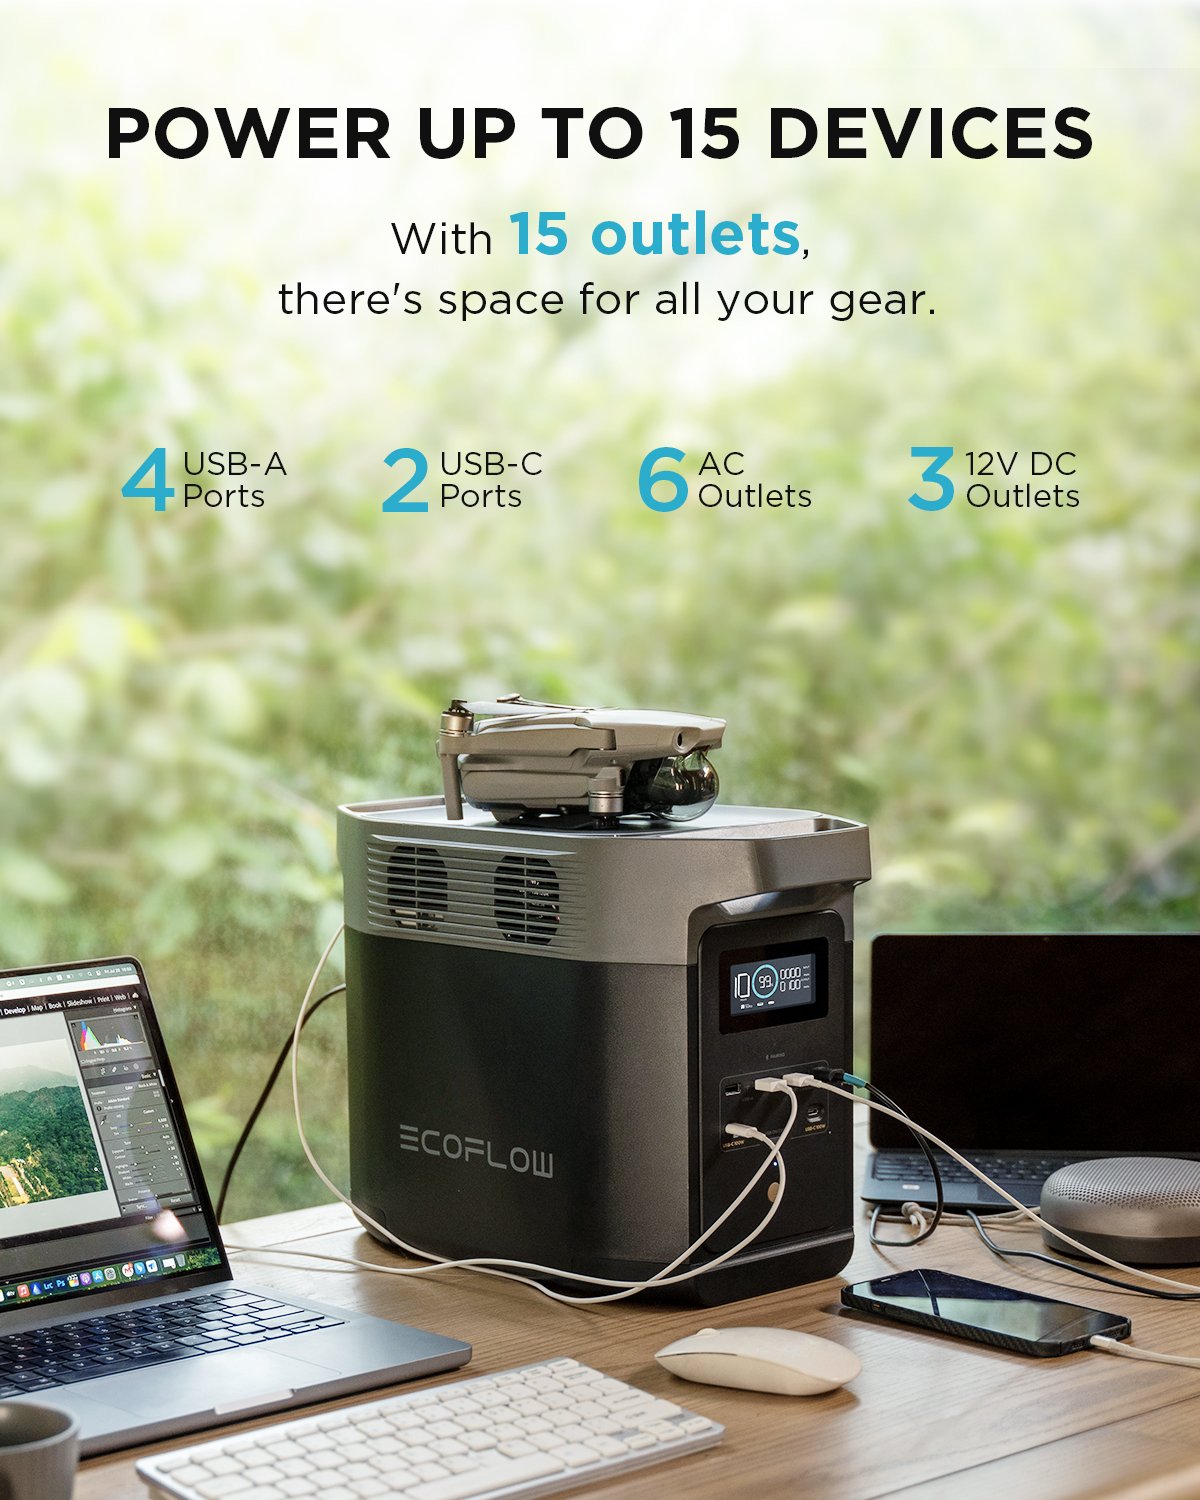 EcoFlow Delta 2 Portable Power Station Power up to 15 Devices